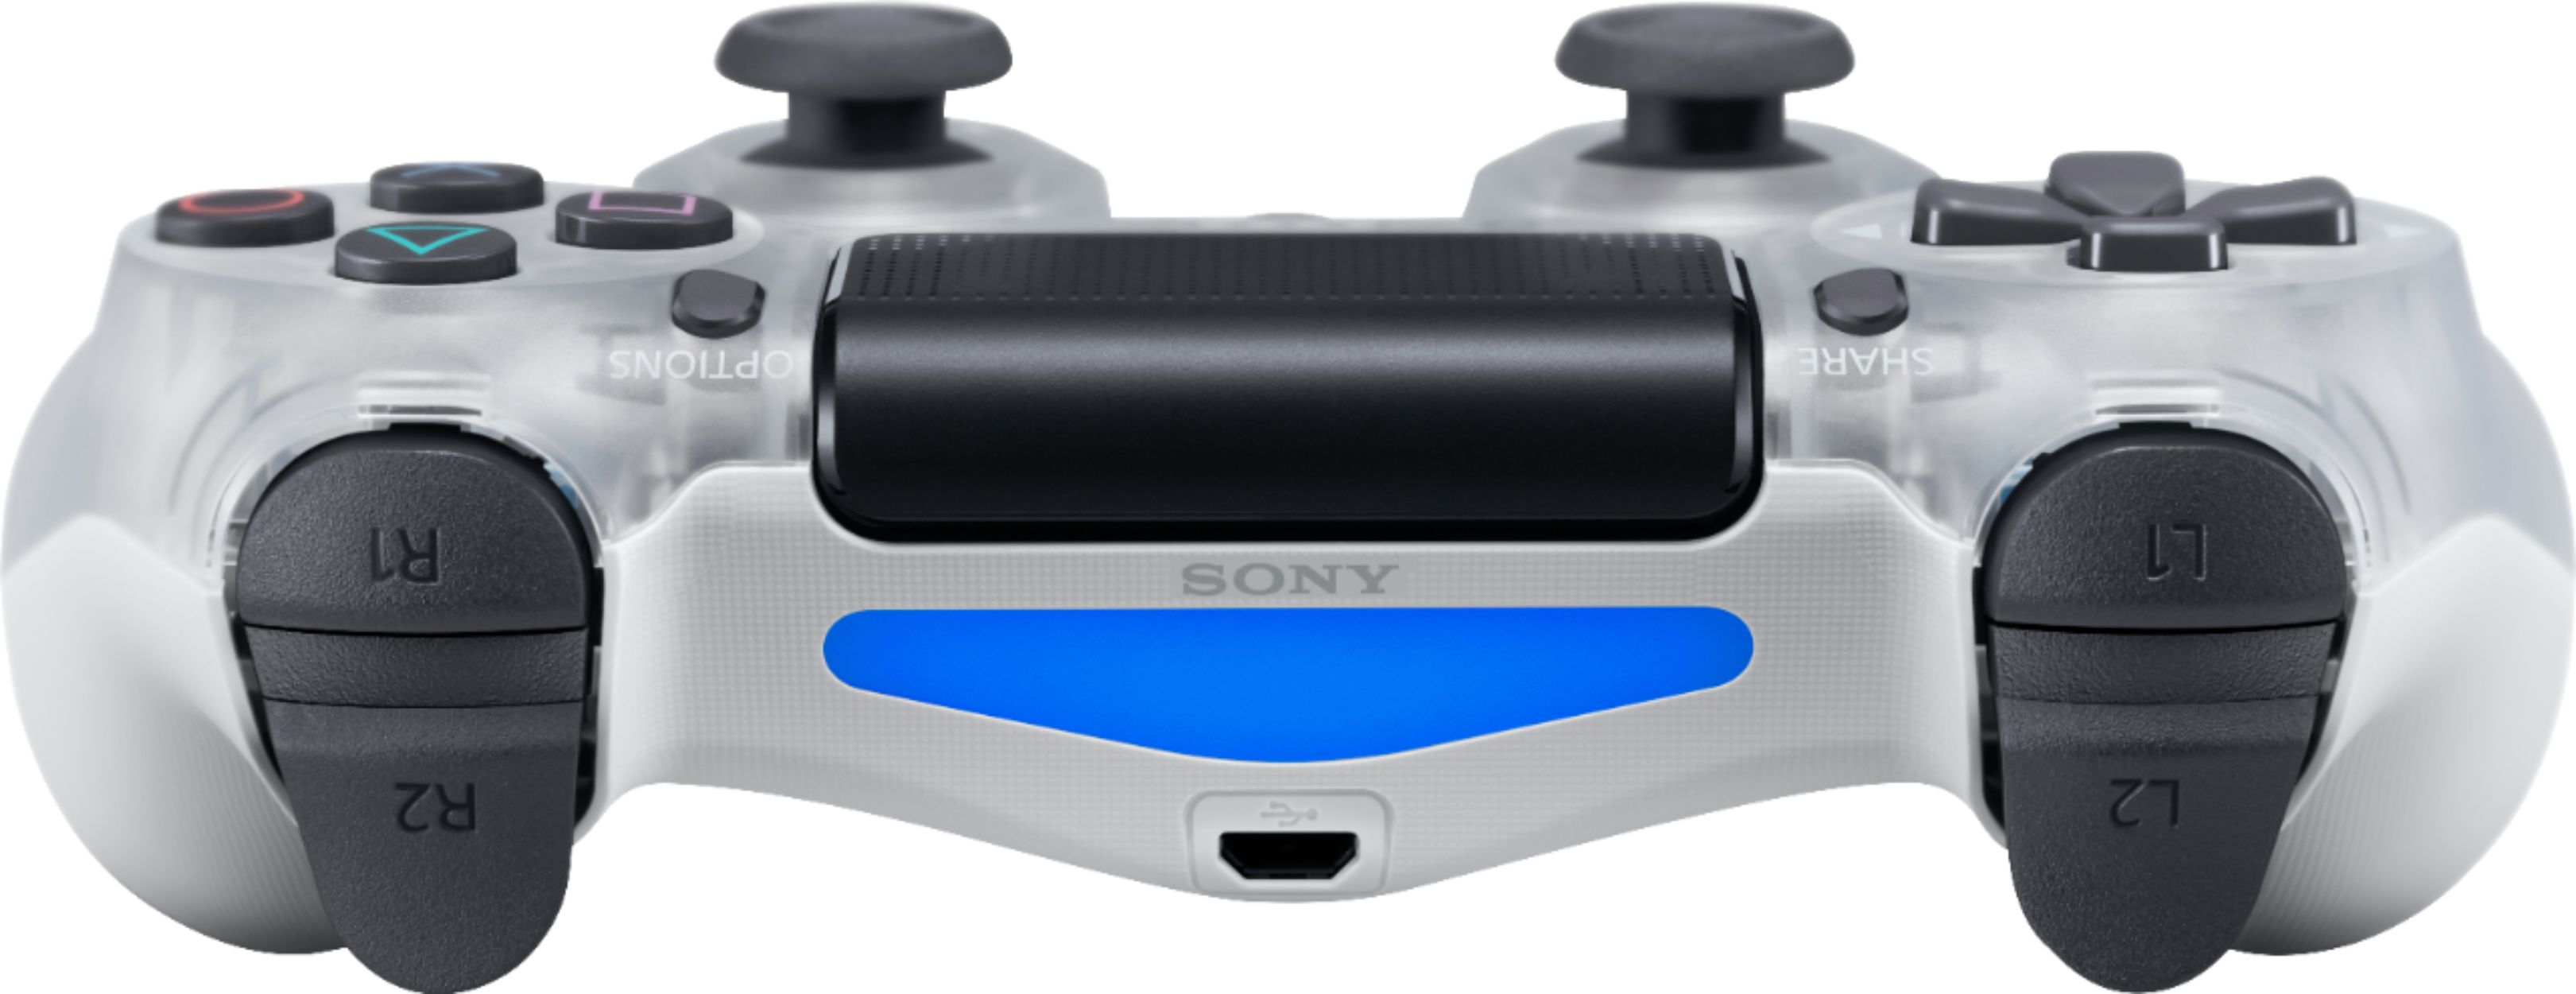 Back View: Sony - Geek Squad Certified Refurbished DualShock 4 Wireless Controller for PlayStation 4 - Midnight Blue